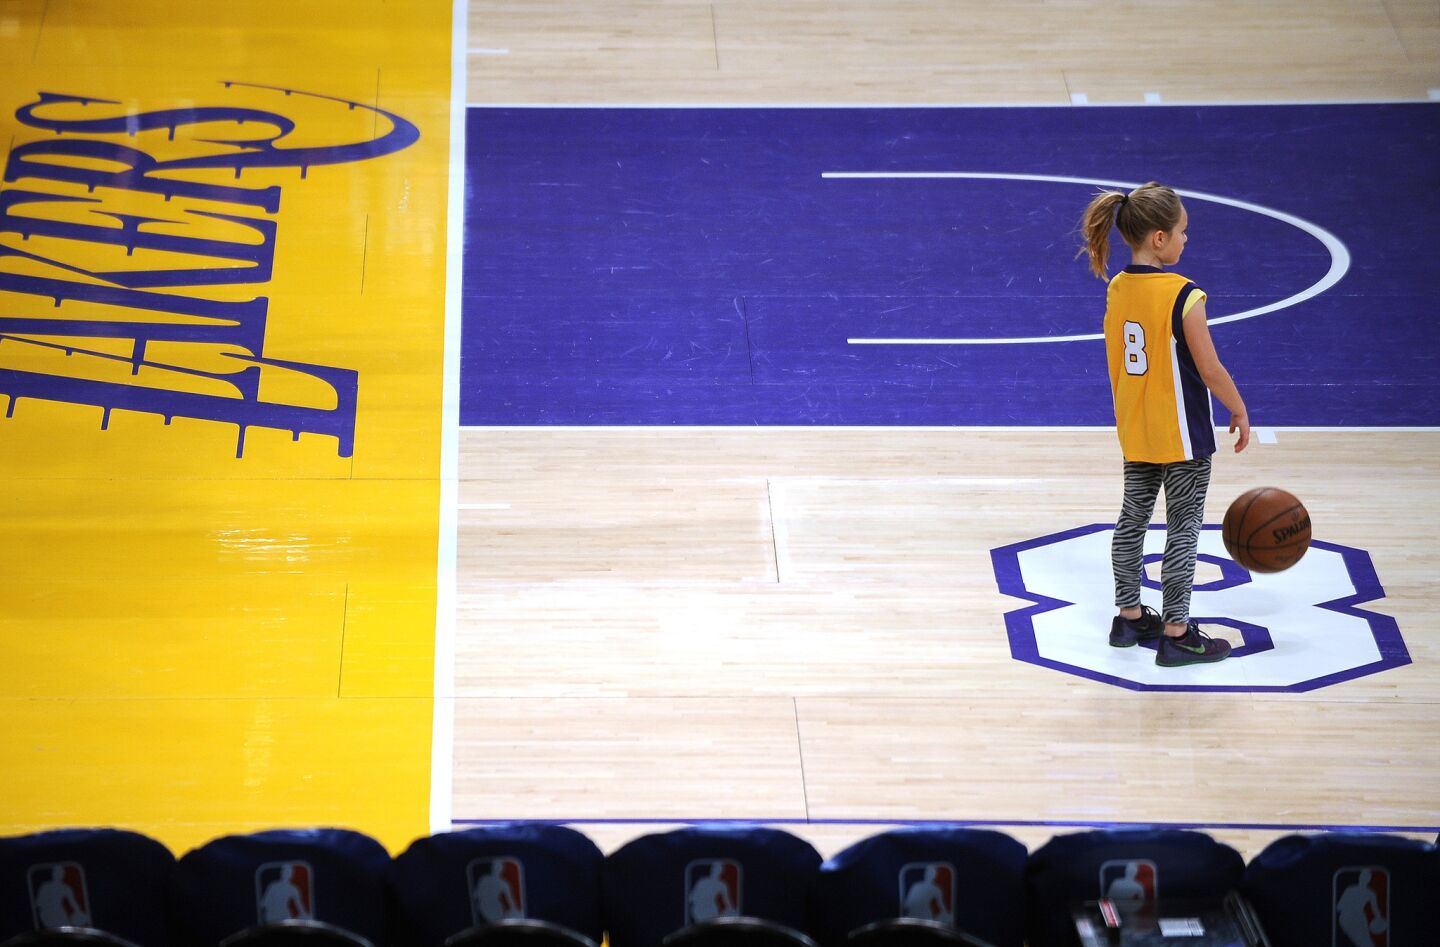 A young girl, sporting Kobe Bryant's original No. 8 Lakers jersey, bounces a ball on the court before the future Hall-of-Famer's final game.